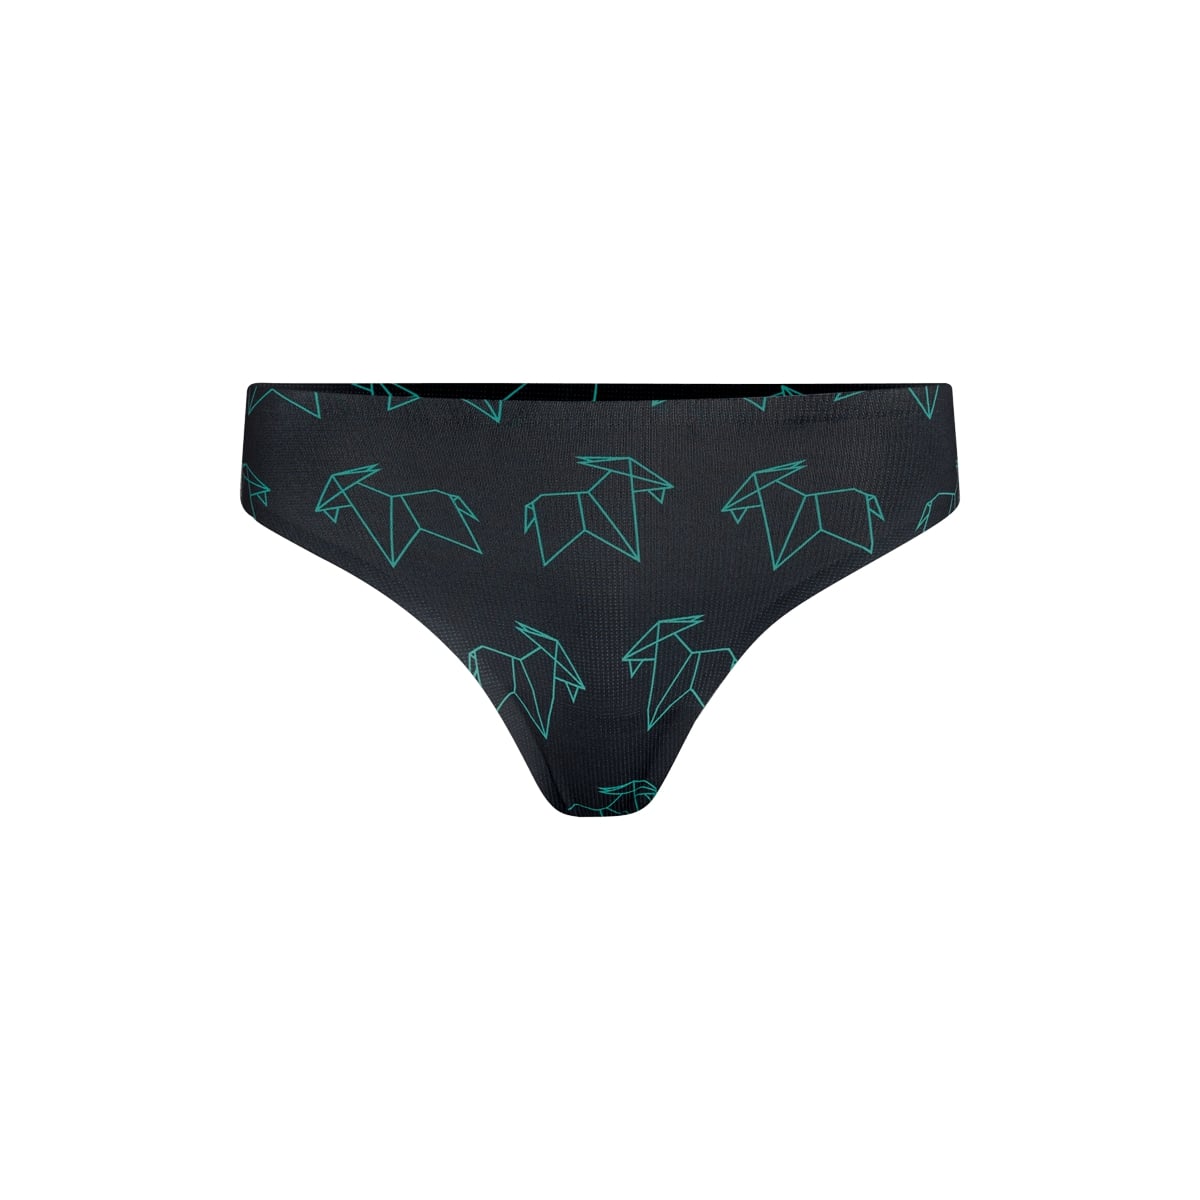 I Consider Buying New Underwear an Act of Self-Care-These 16 Are in My Cart